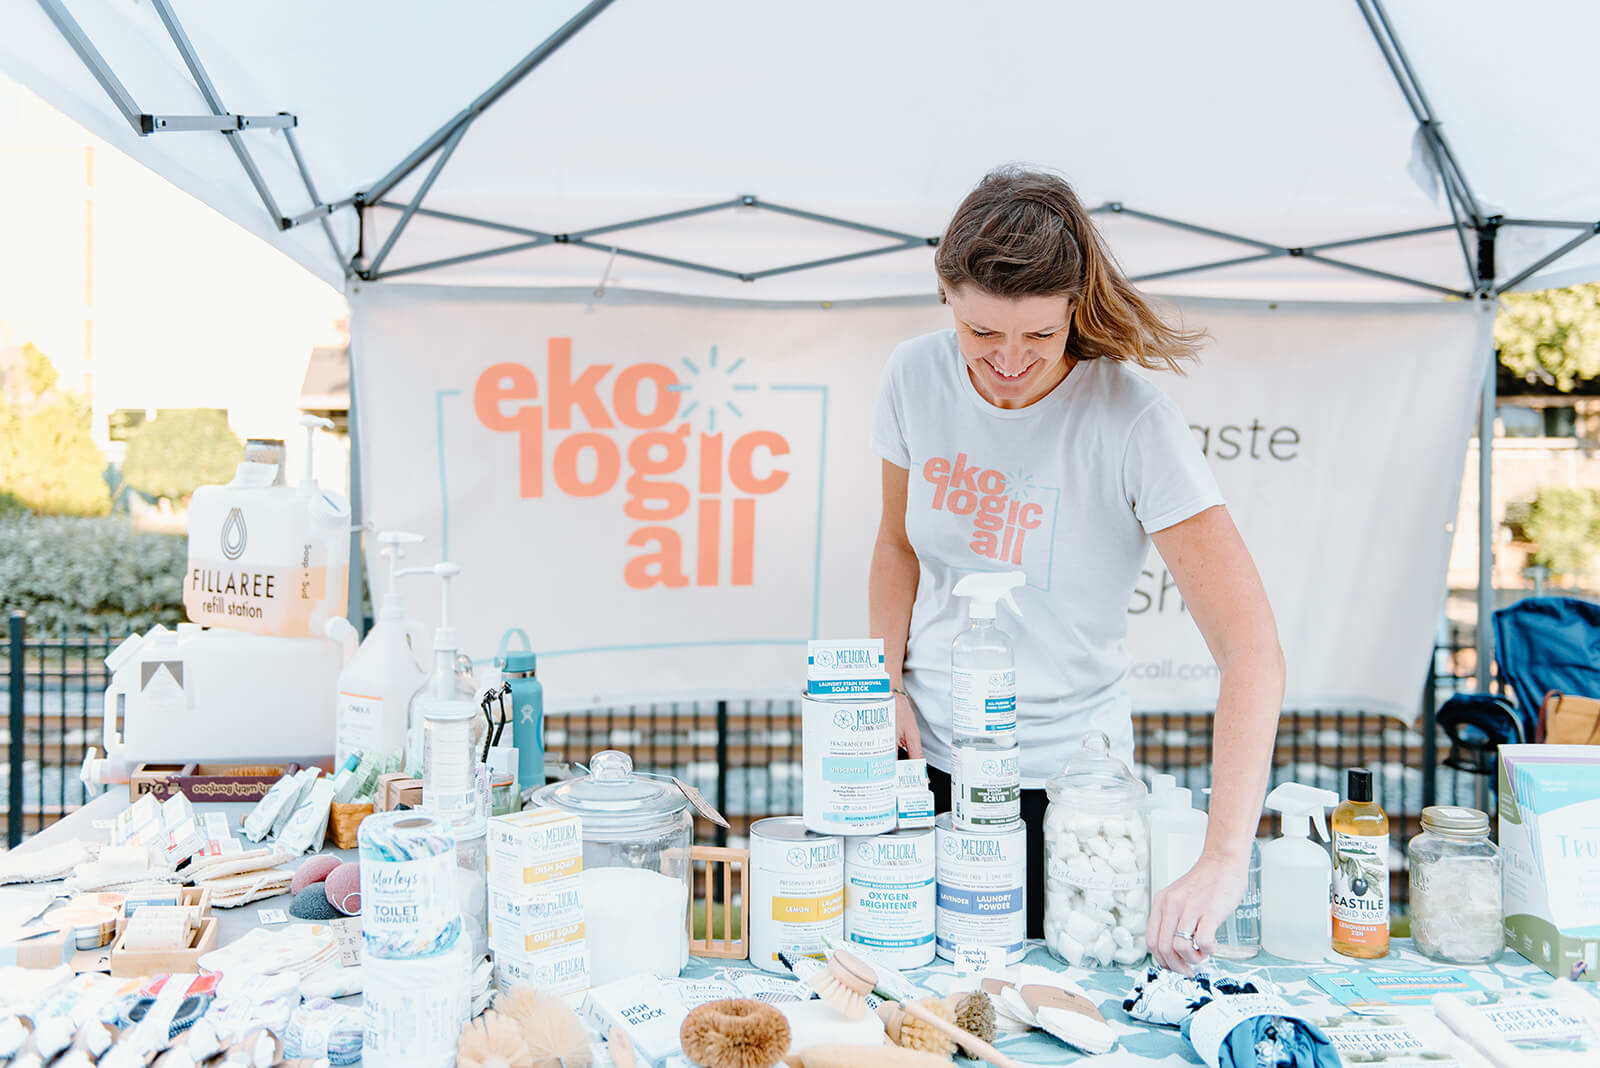 Ekologicall's booth with its owner at a pop-up event